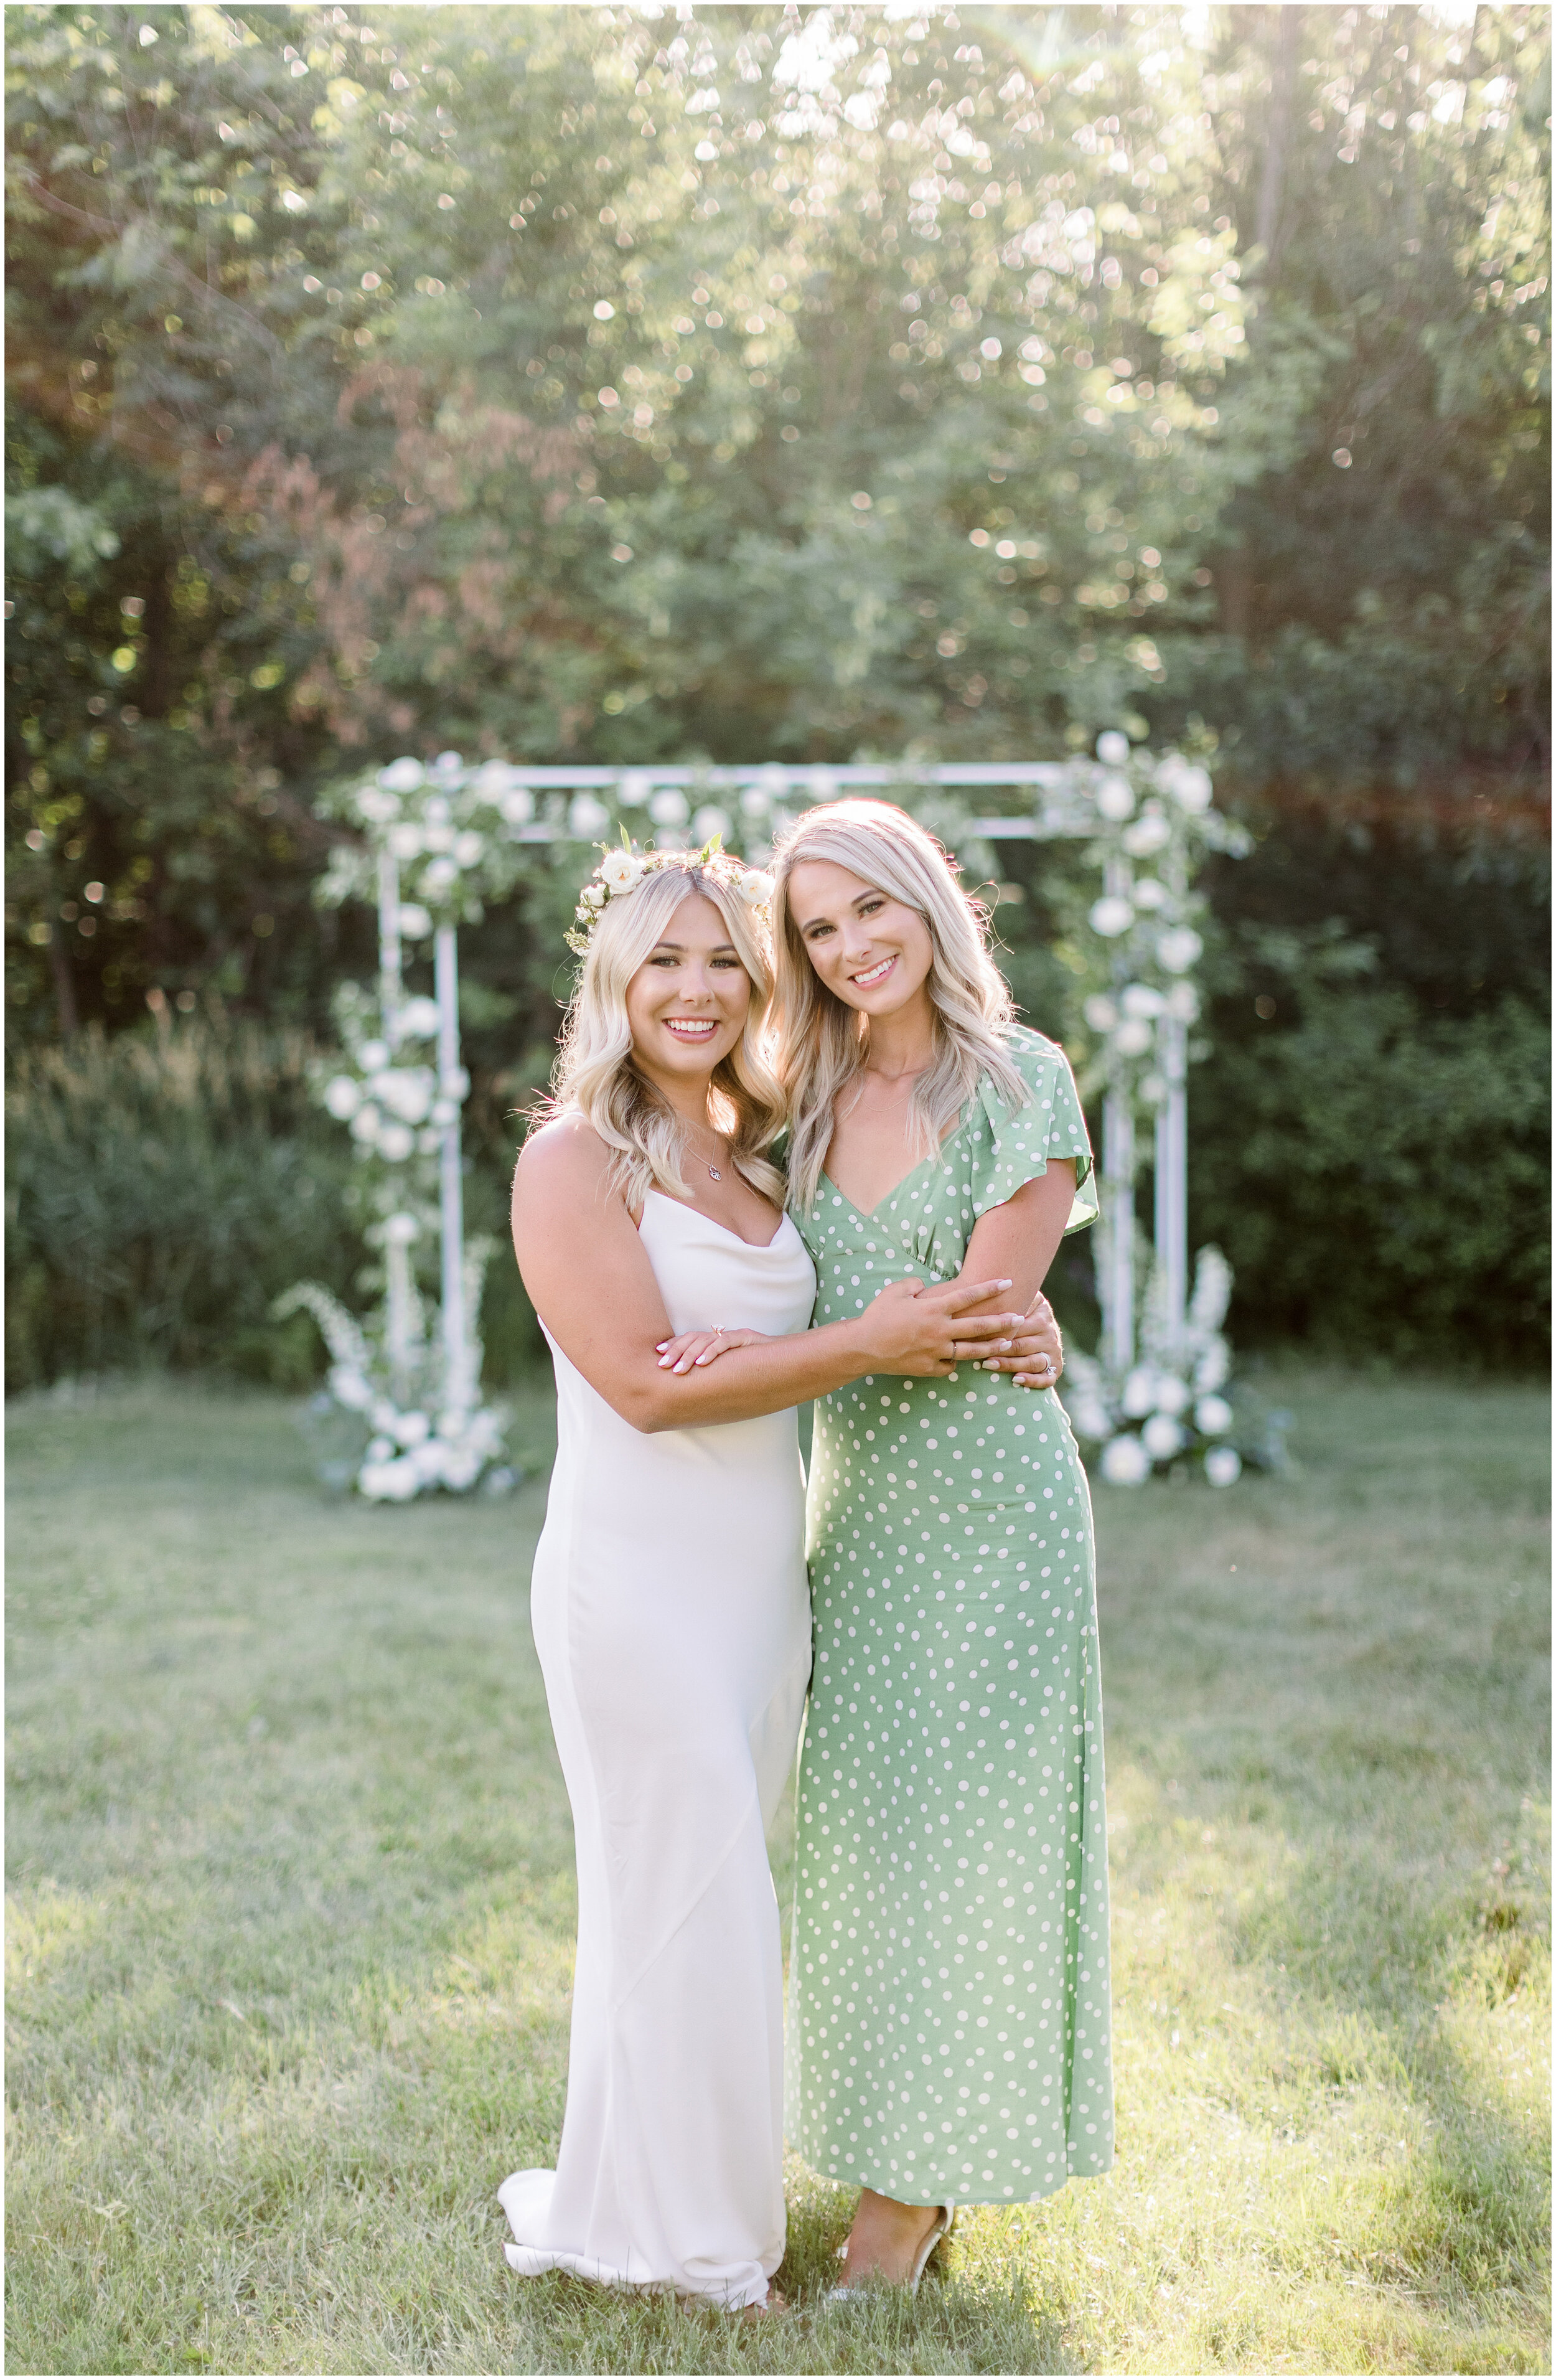  Bride and bridesmaid in green and white dress for white and green wedding colors in Ottawa, ON by Chelsea Morgan Photography. white and green wedding colors bridesmaid outfit ideas what color should my bridesmaid wear green bridesmaid dresses white 